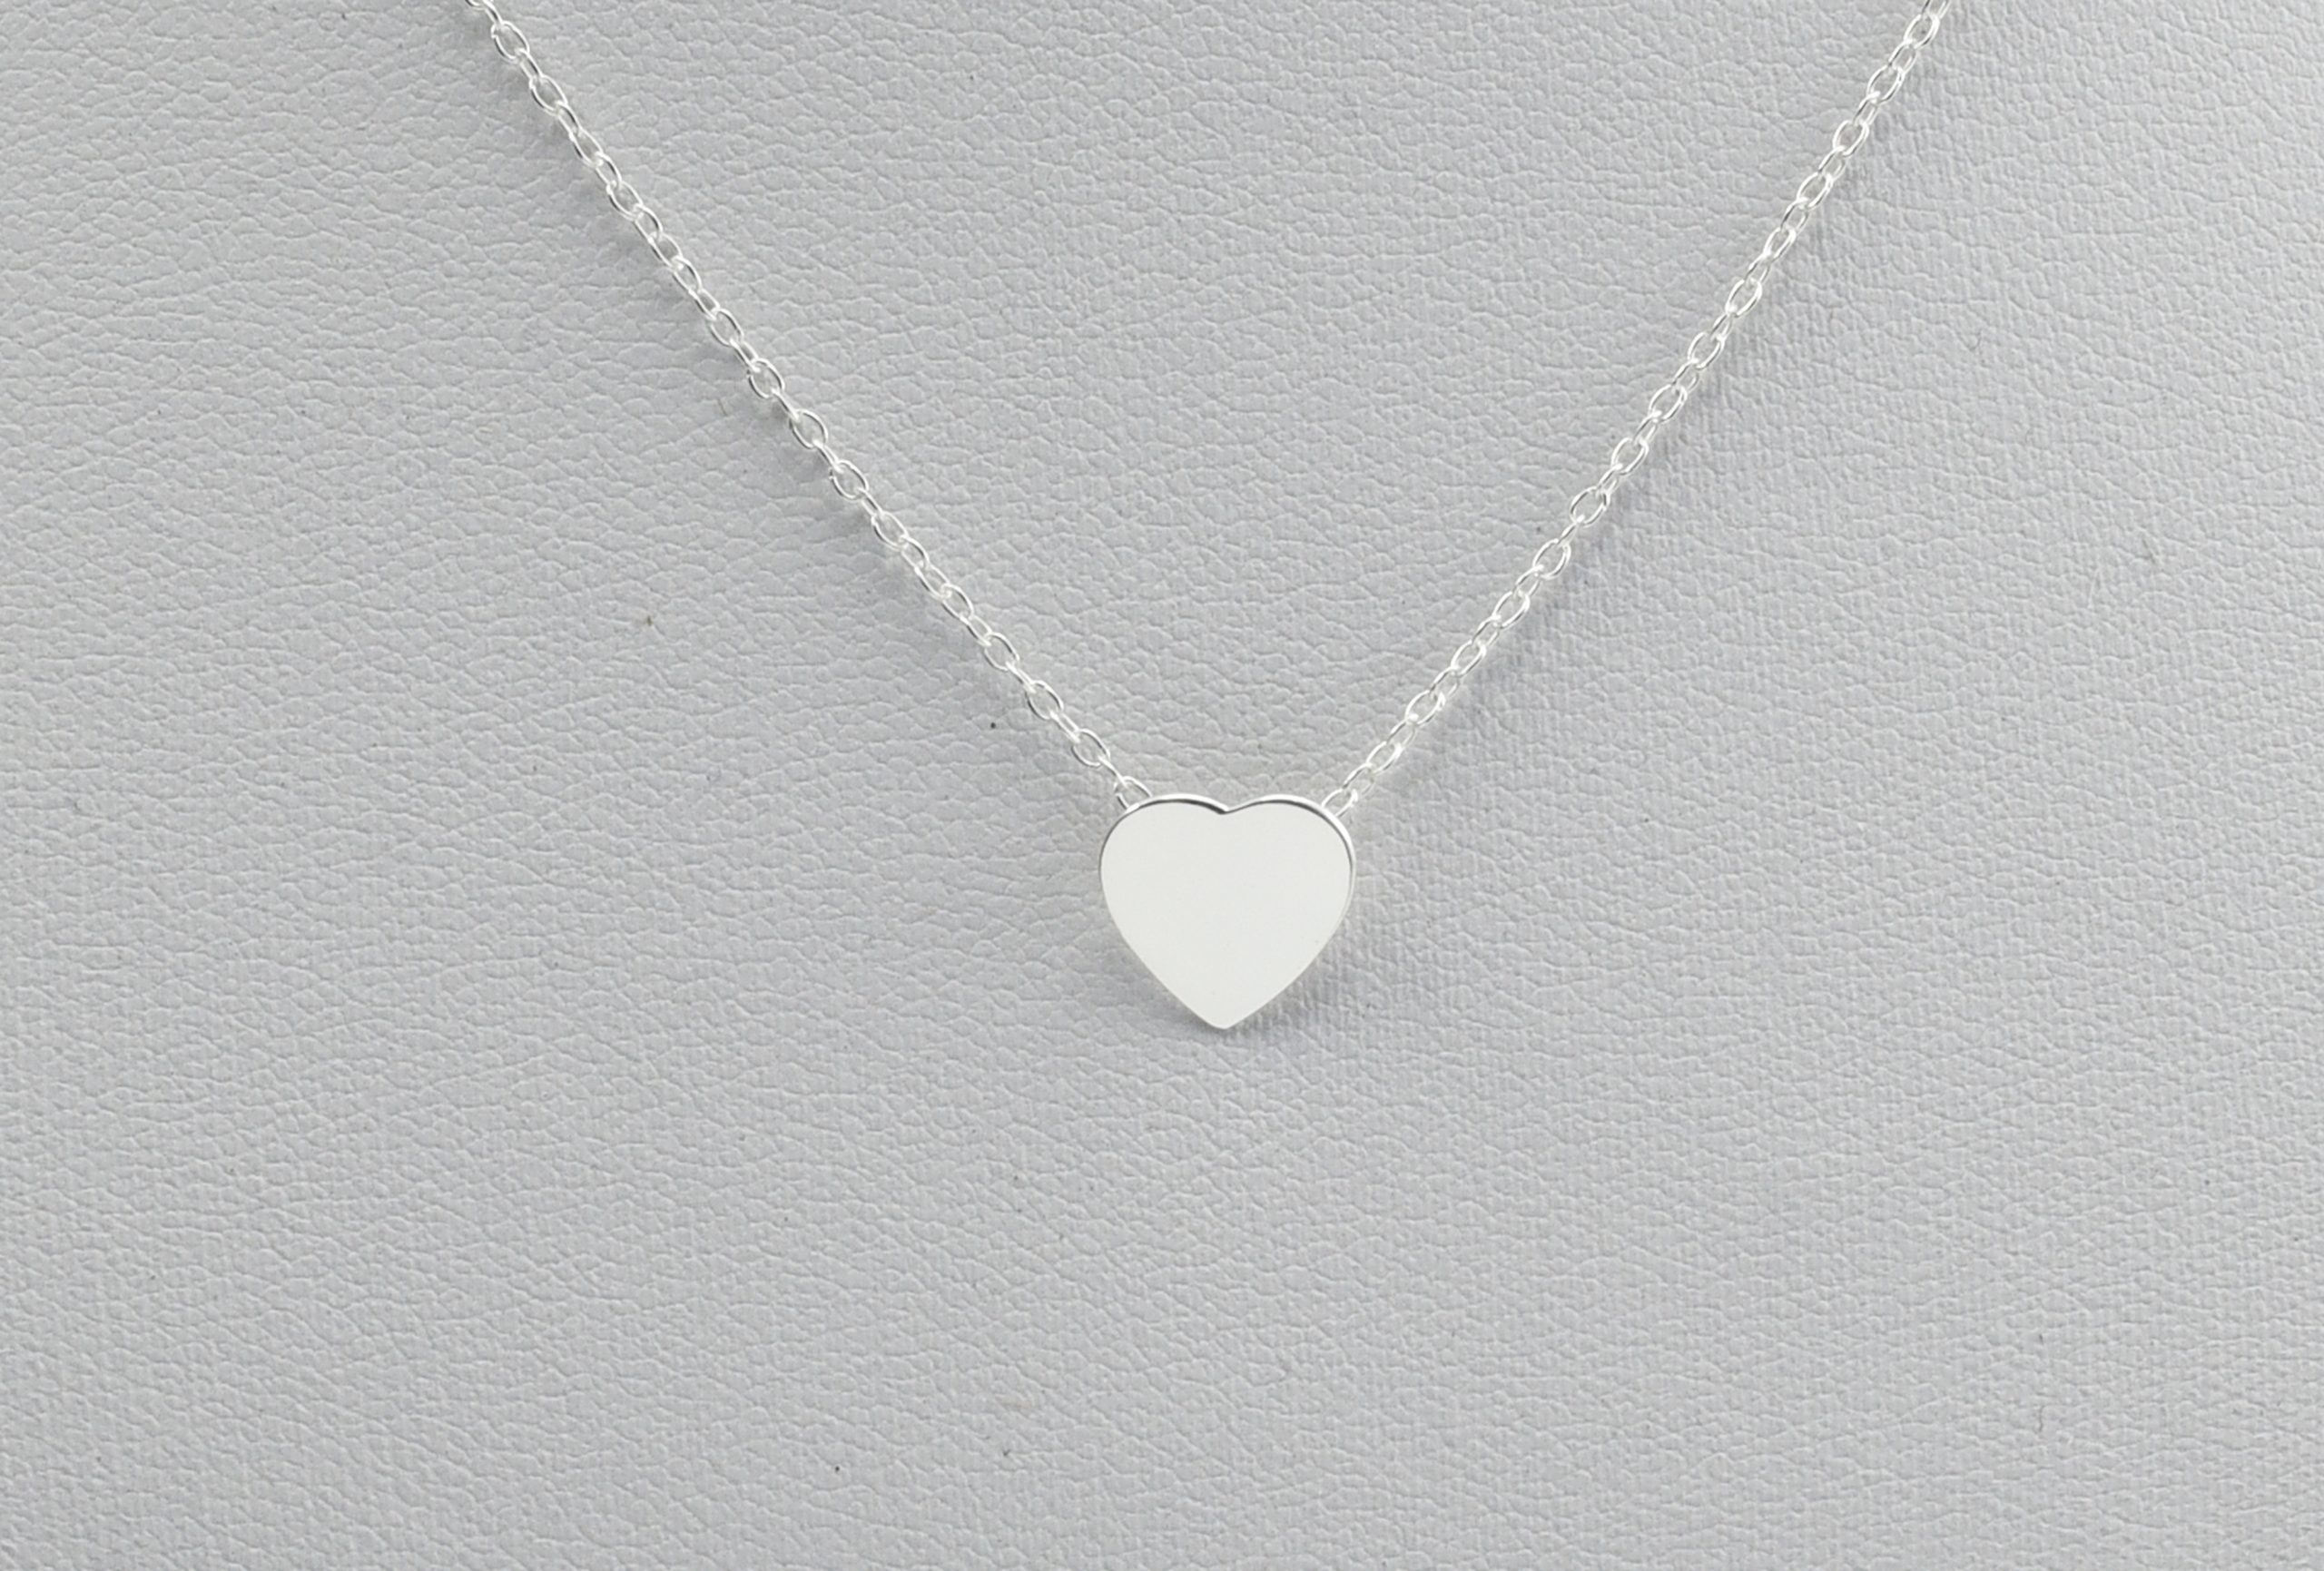 Silver Dainty Heart Charm Silver Necklace, Sterling Silver Pendant